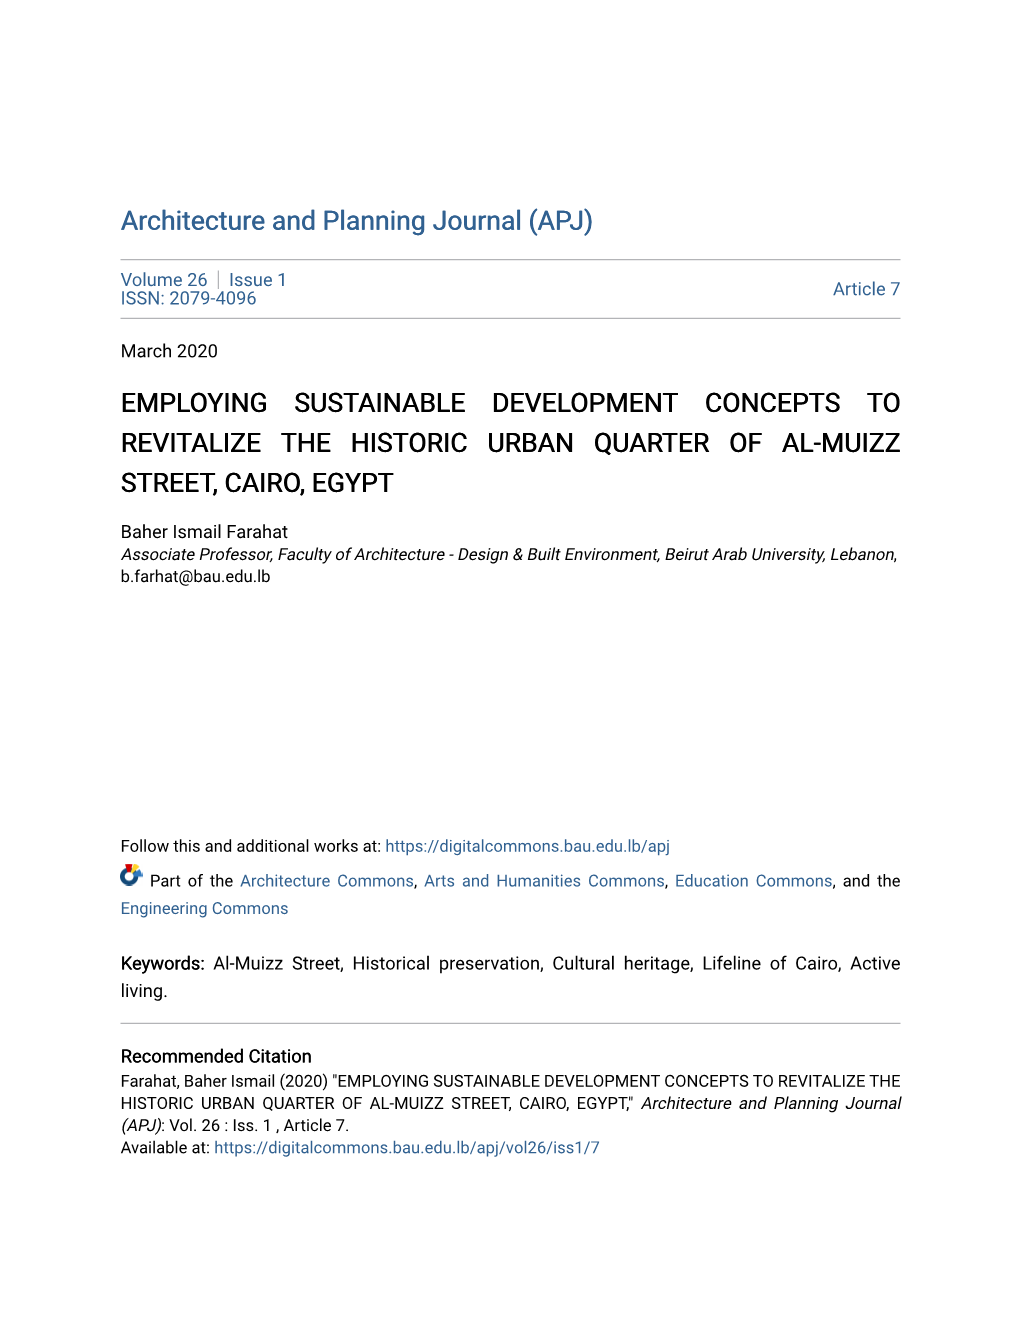 Employing Sustainable Development Concepts to Revitalize the Historic Urban Quarter of Al-Muizz Street, Cairo, Egypt